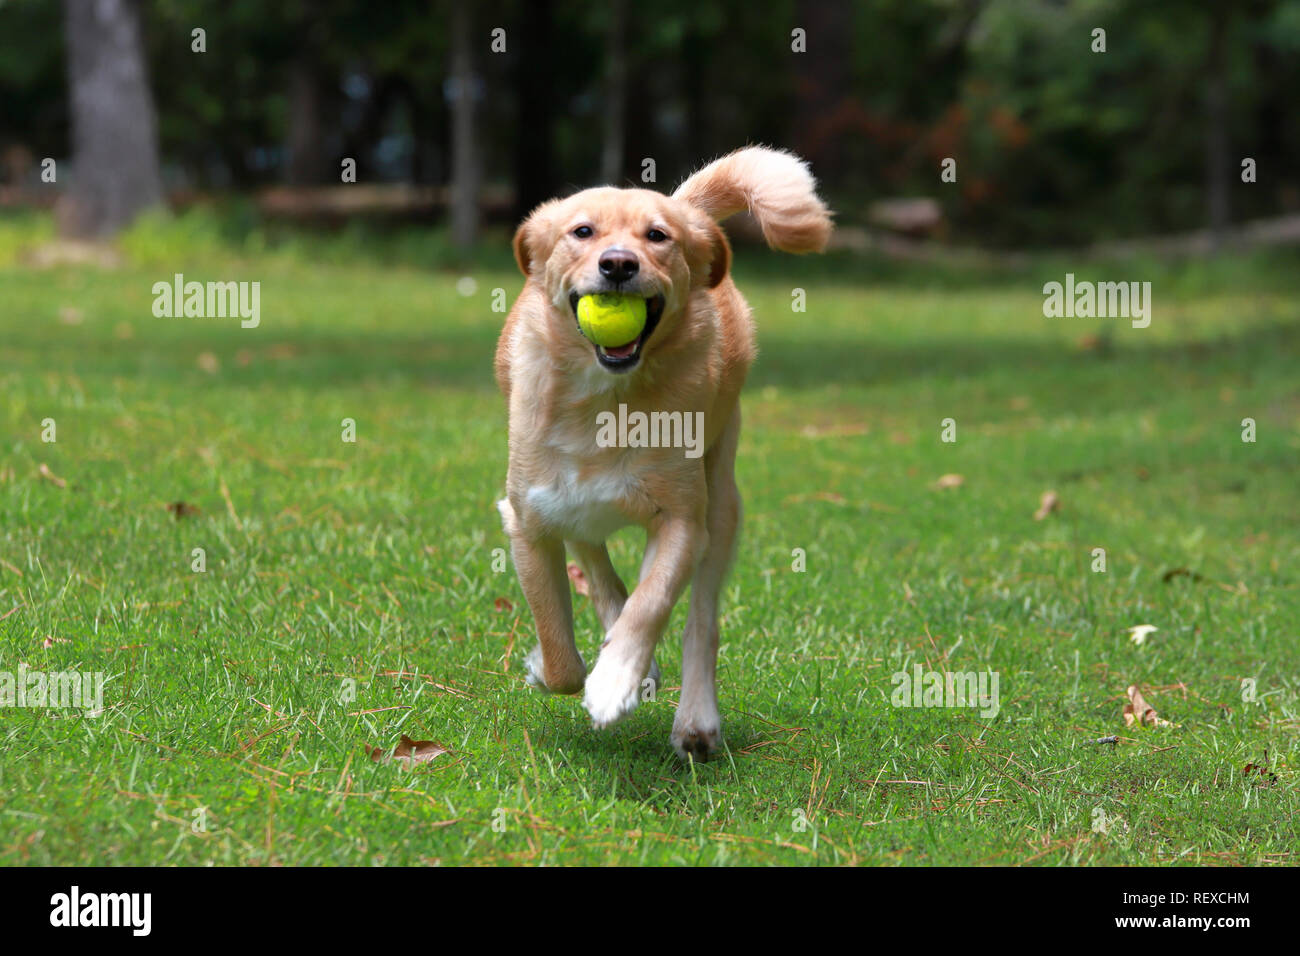 Golden mix dog playing fetch in the backyard with tennis ball Stock Photo